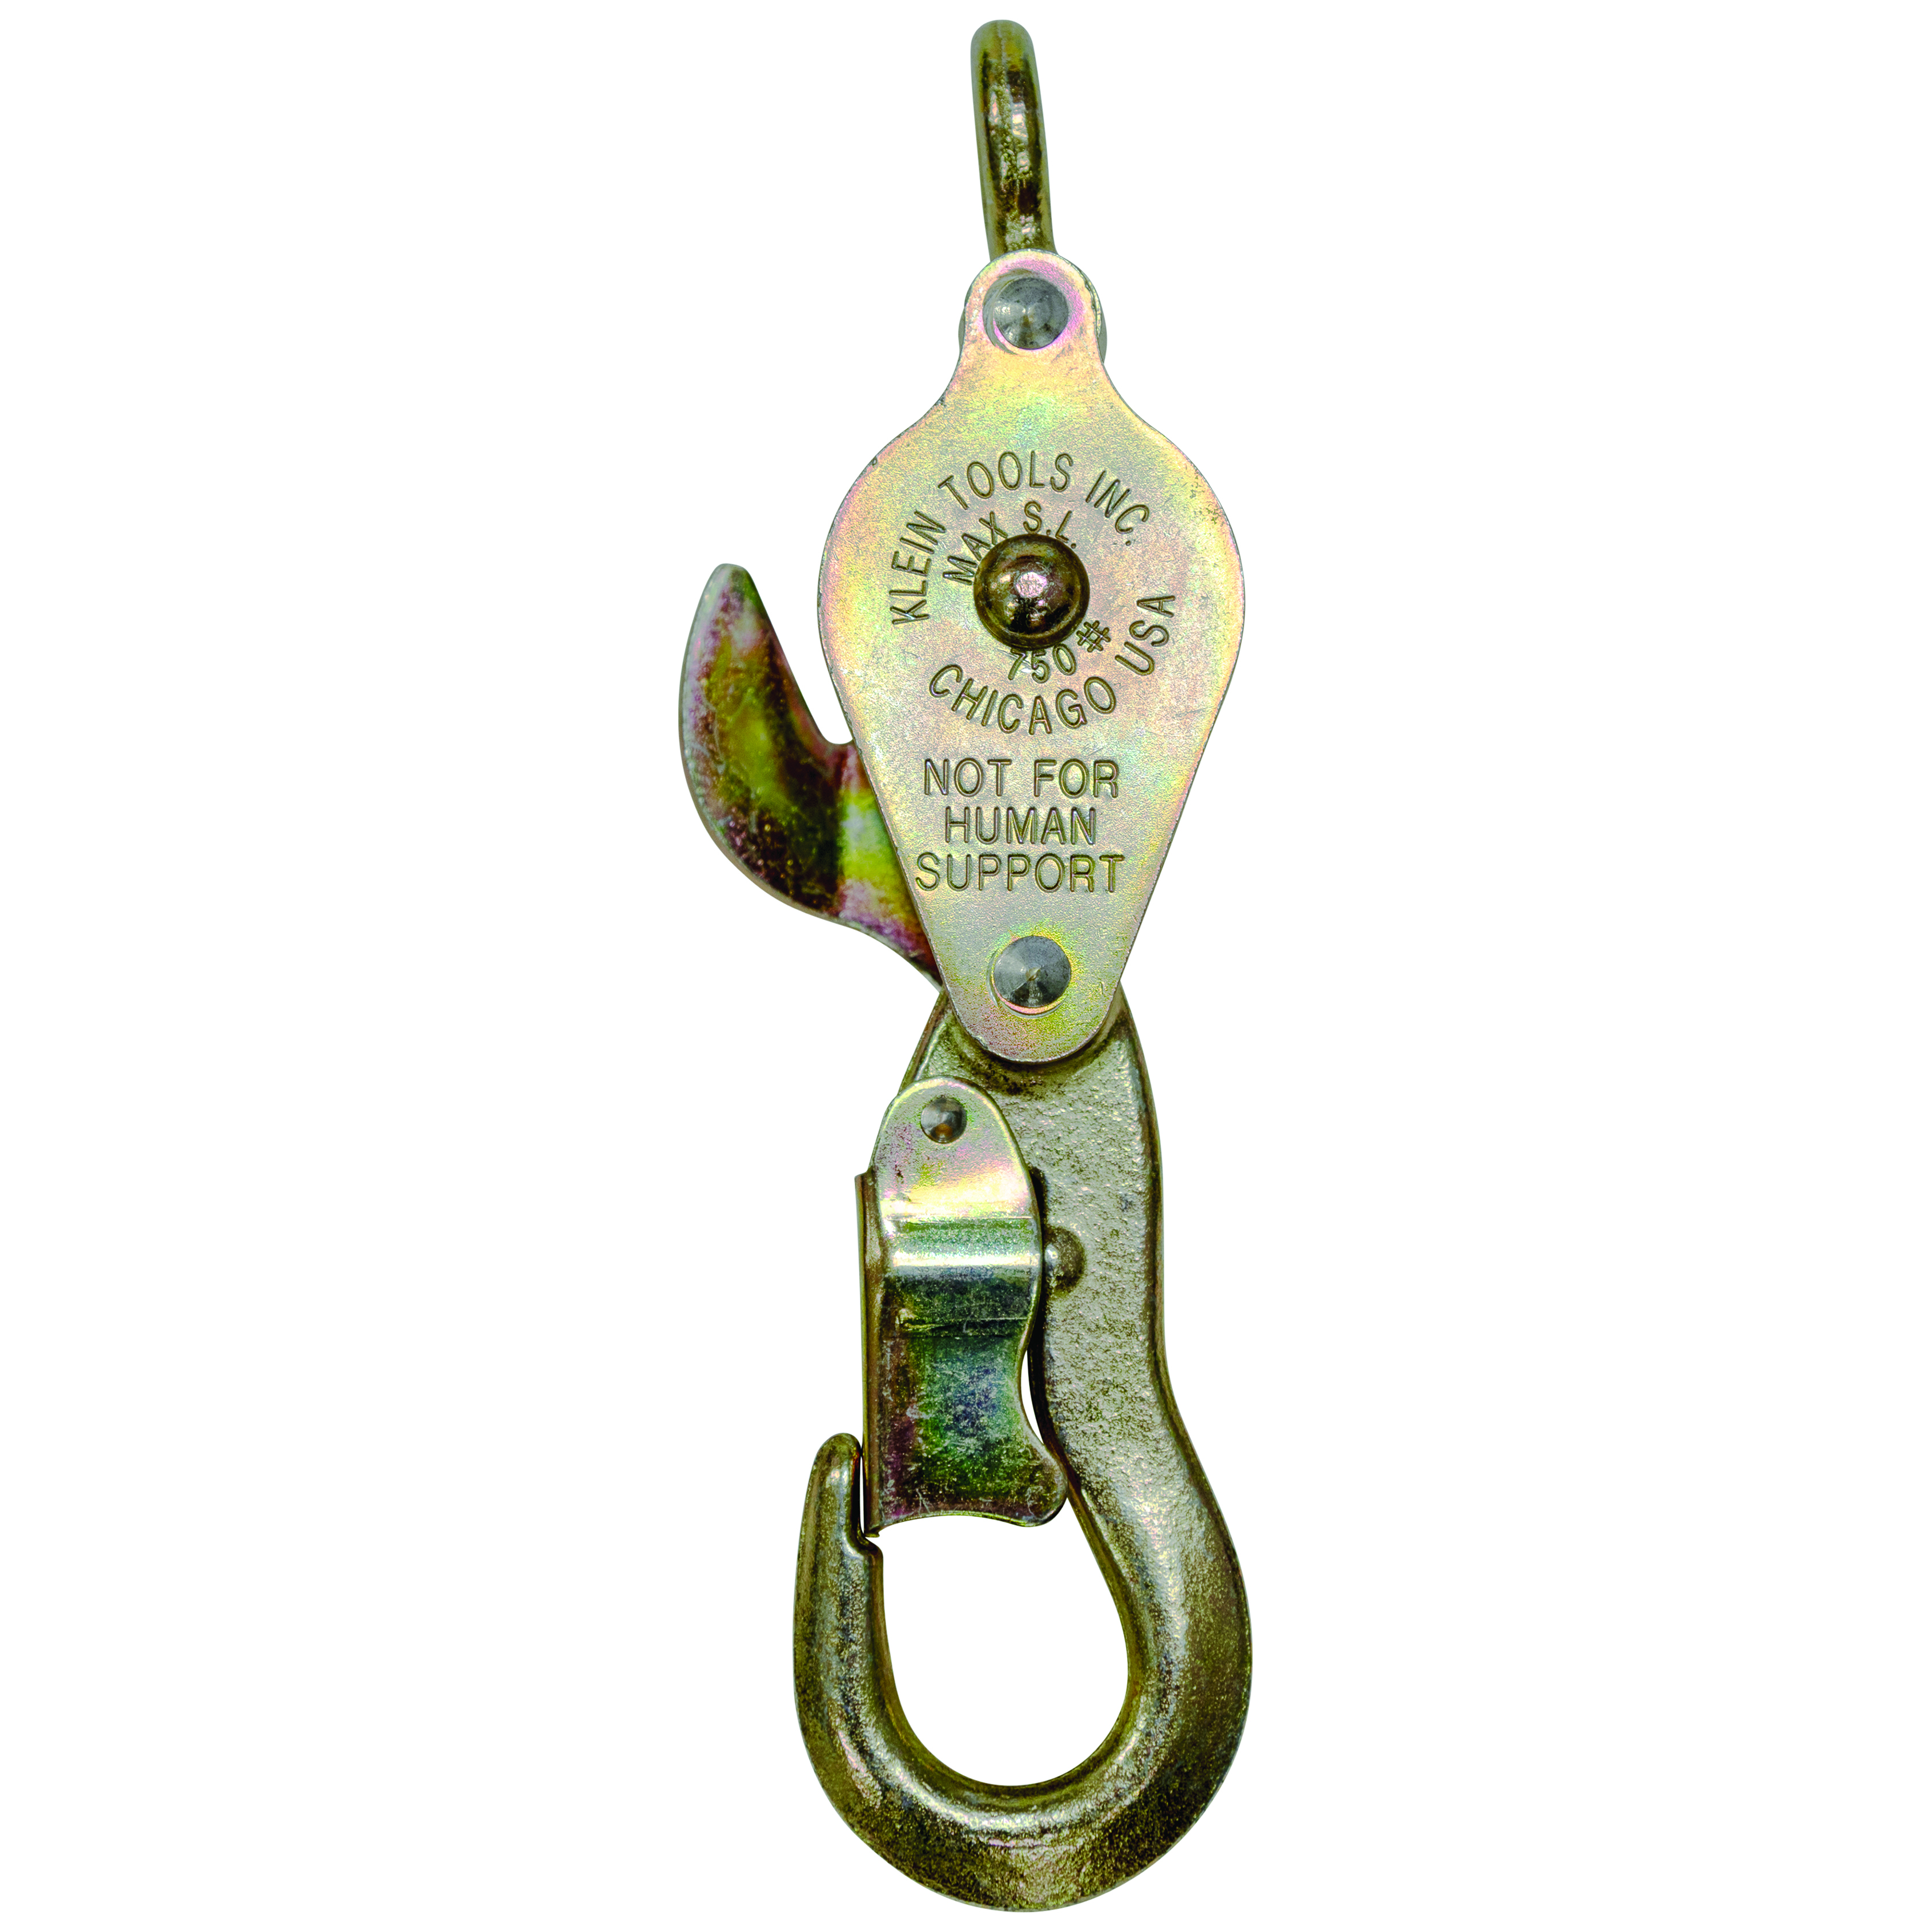 Block and Tackle with Anchor Hook Cat. No. 258 - 1802-30 | Klein Tools